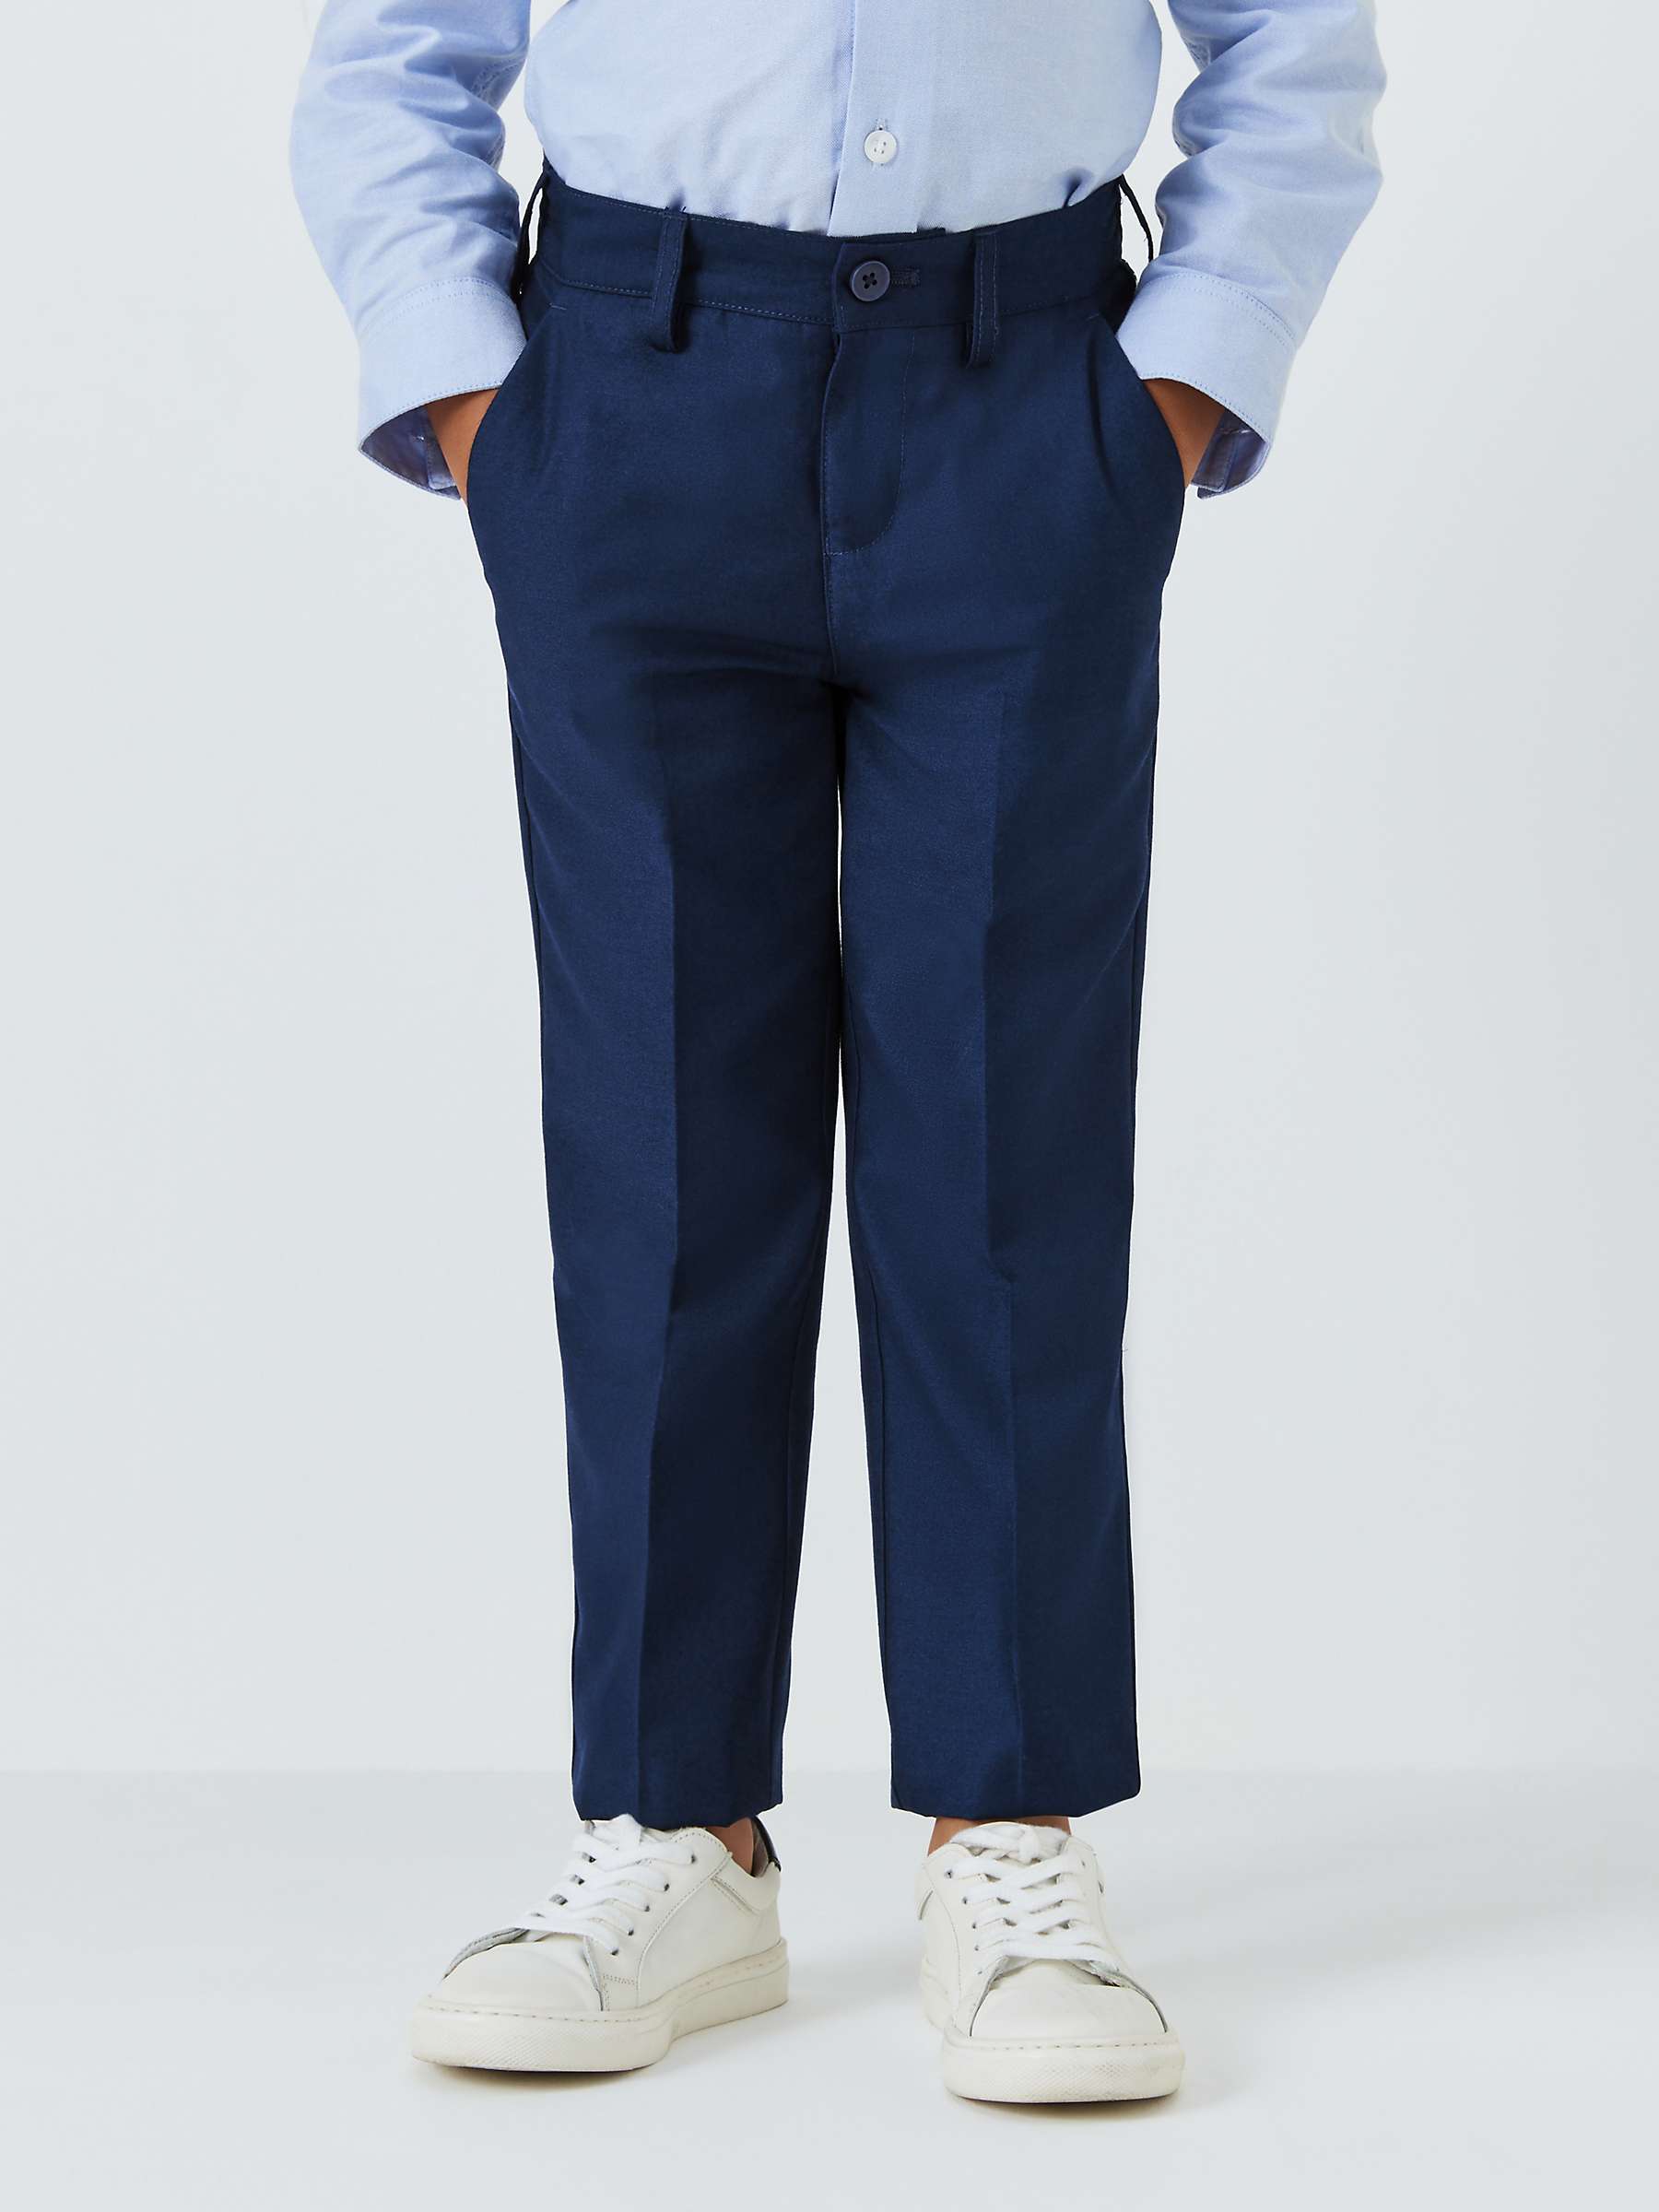 Buy John Lewis Heirloom Collection Kids' Twill Suit Trousers, Blue Online at johnlewis.com